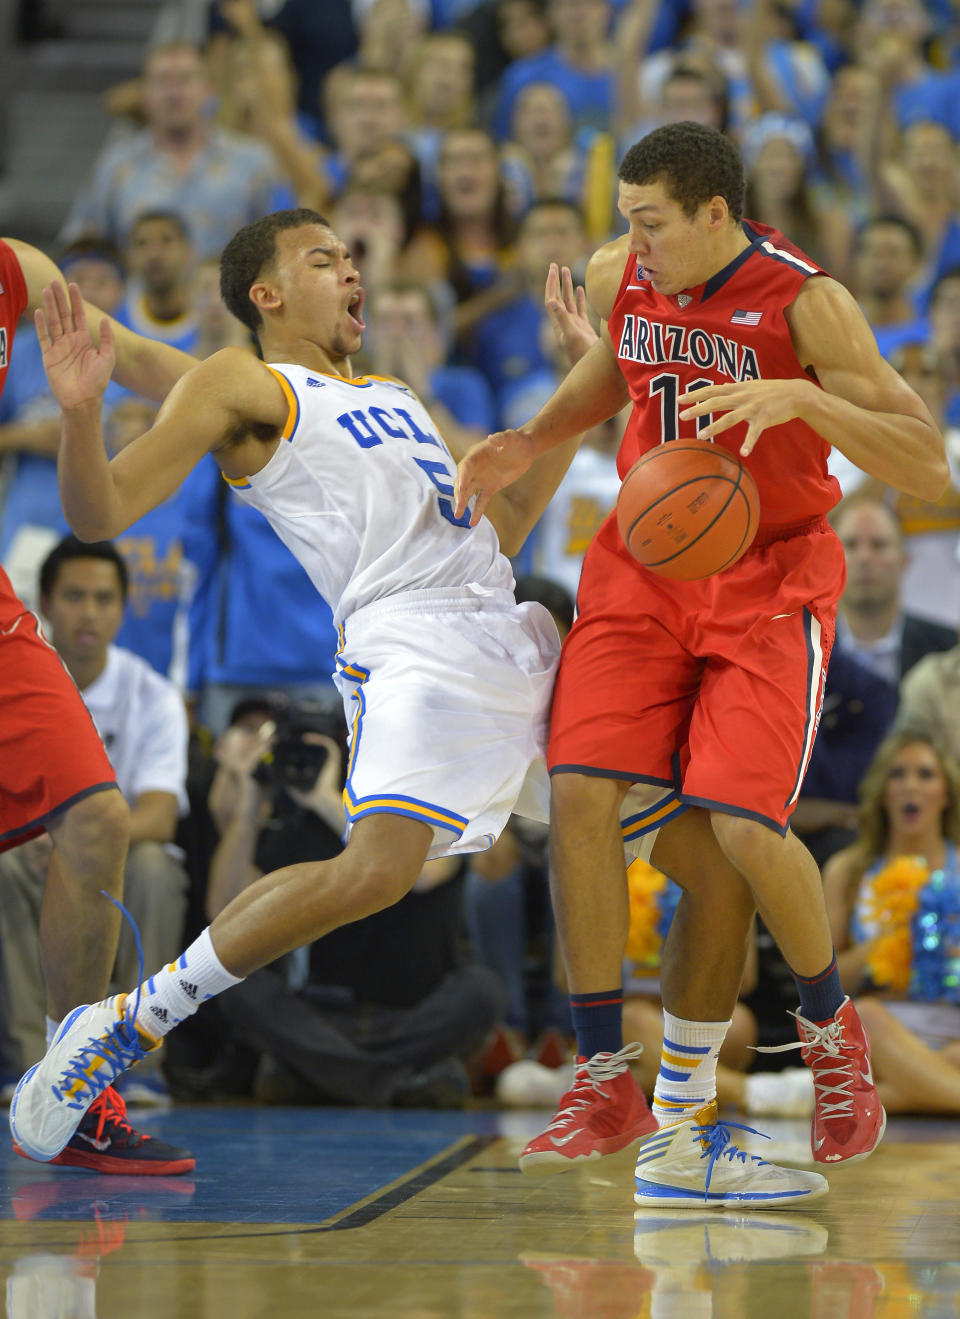 Arizona forward Aaron Gordon, right, collides with UCLA forward Kyle Anderson during the second half of an NCAA college basketball game on Thursday, Jan. 9, 2014, in Los Angeles. (AP Photo/Mark J. Terrill)